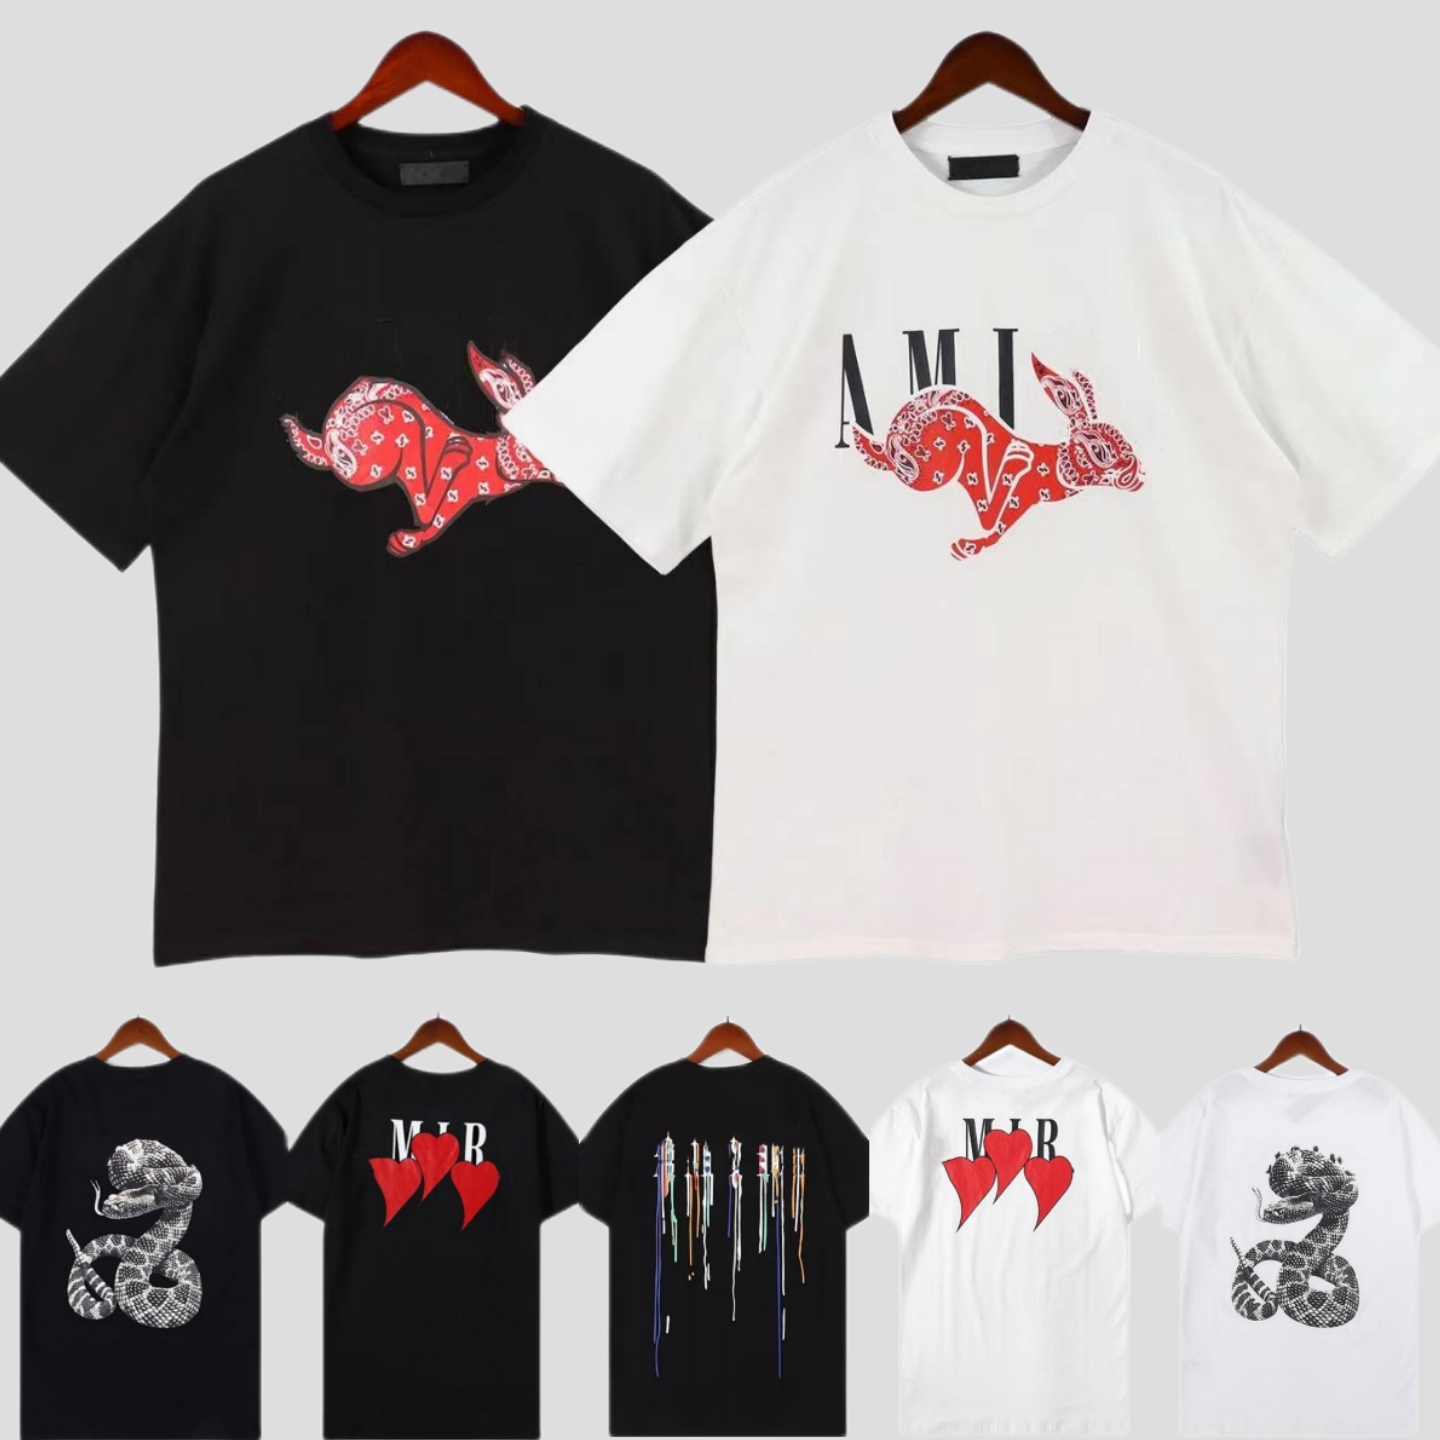 

Limited edition designer t shirt of 2023 rabbit year new couples tees street wear summer fashion shirt splash-ink letter print design couple short sleeves, No.39 ( 2 pieces 10% off )